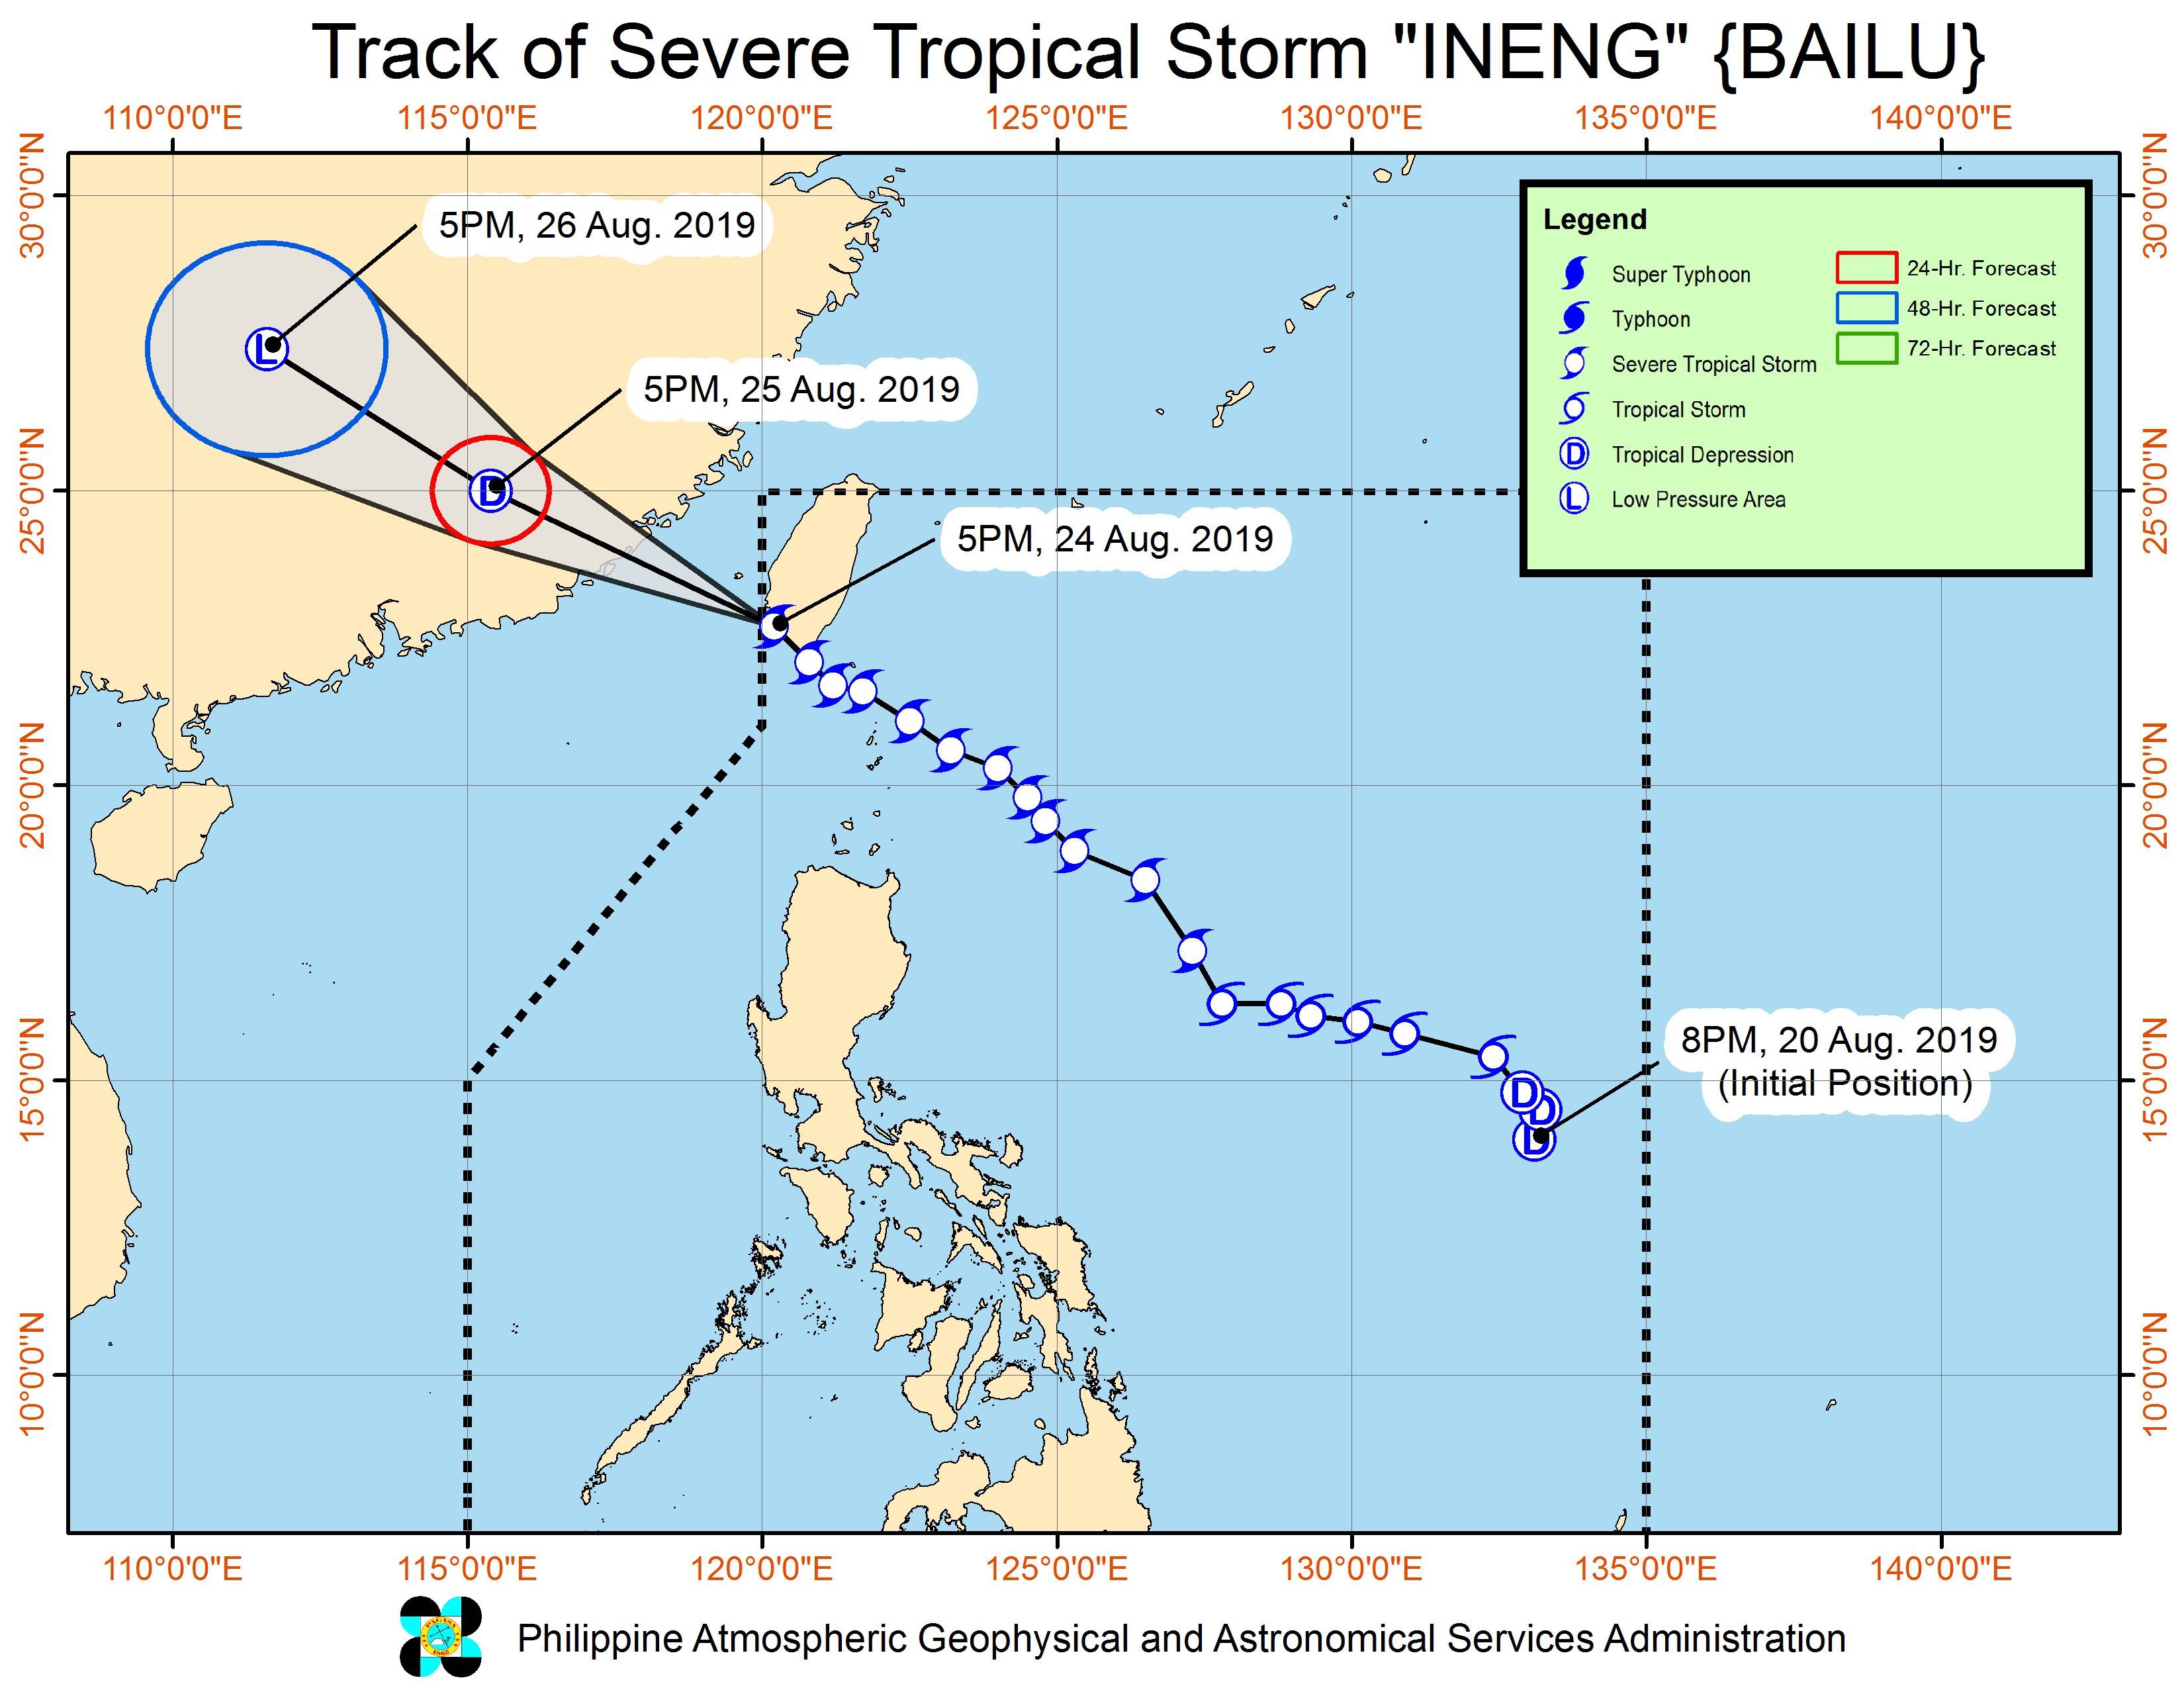 Forecast track of Severe Tropical Storm Ineng (Bailu) as of August 24, 2019, 8 pm. Image from PAGASA 